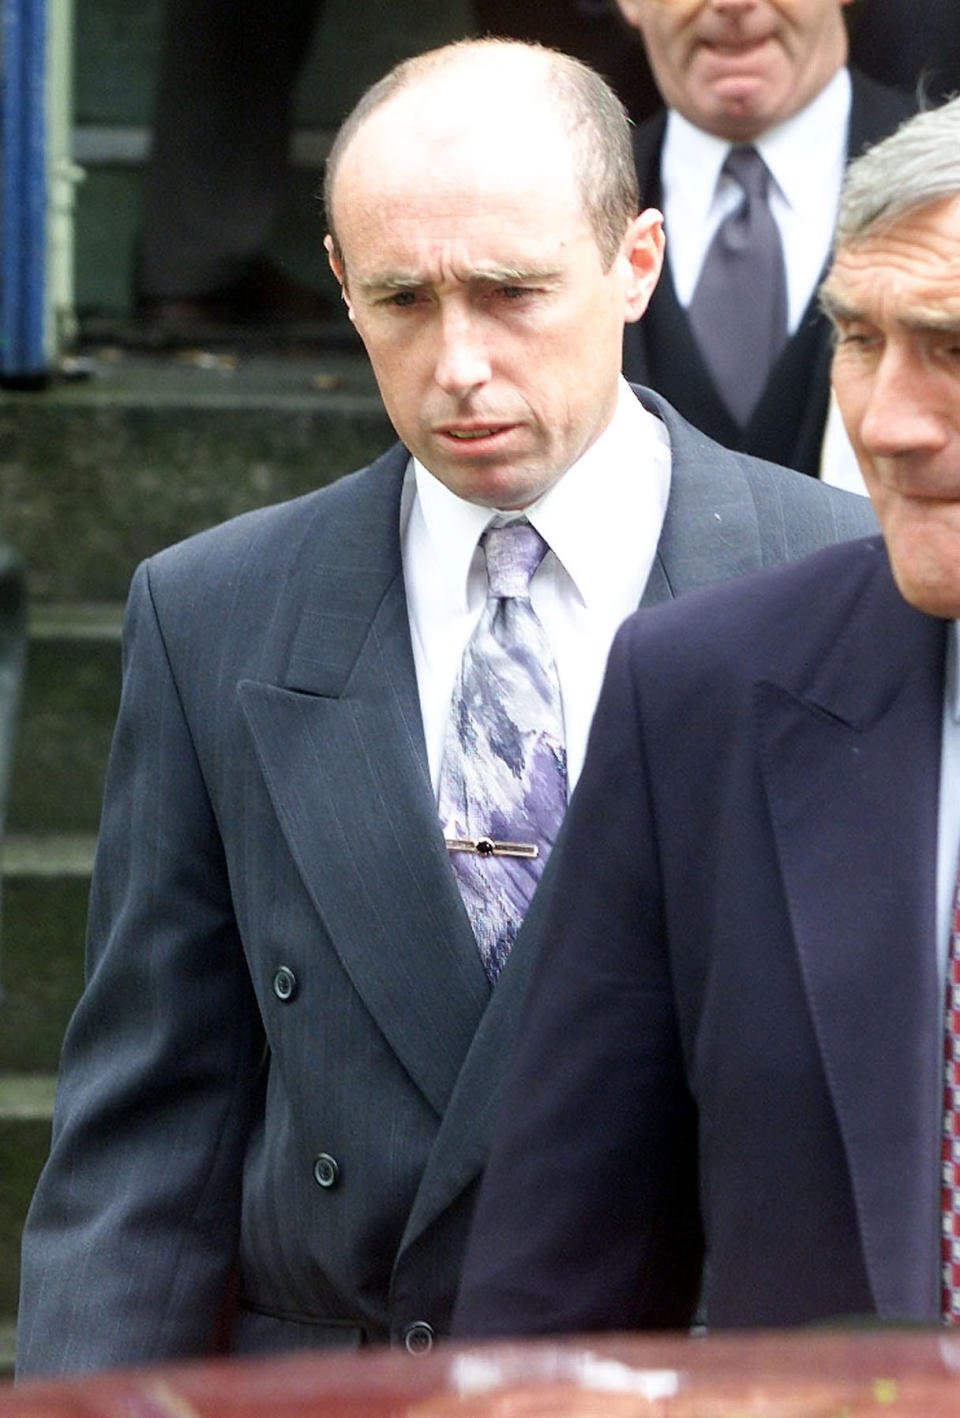 Gary Hart leaves Selby Magistrates Court after his first appearence accused of causing the deaths of the ten people who died in the Selby rail disaster.   * Hart, 36, of Church Lane, Strubby, Lincolnshire, appeared in connection with the incident at the village of Great Heck, near Selby, North Yorkshire, on February 28 2001, which claimed the lives of six passengers and four railway staff. Hart was driving a Land Rover which left the M62 motorway, careered down a grass embankment and ended up on the main East Coast rail line.   (Photo by Owen Humphreys - PA Images/PA Images via Getty Images)